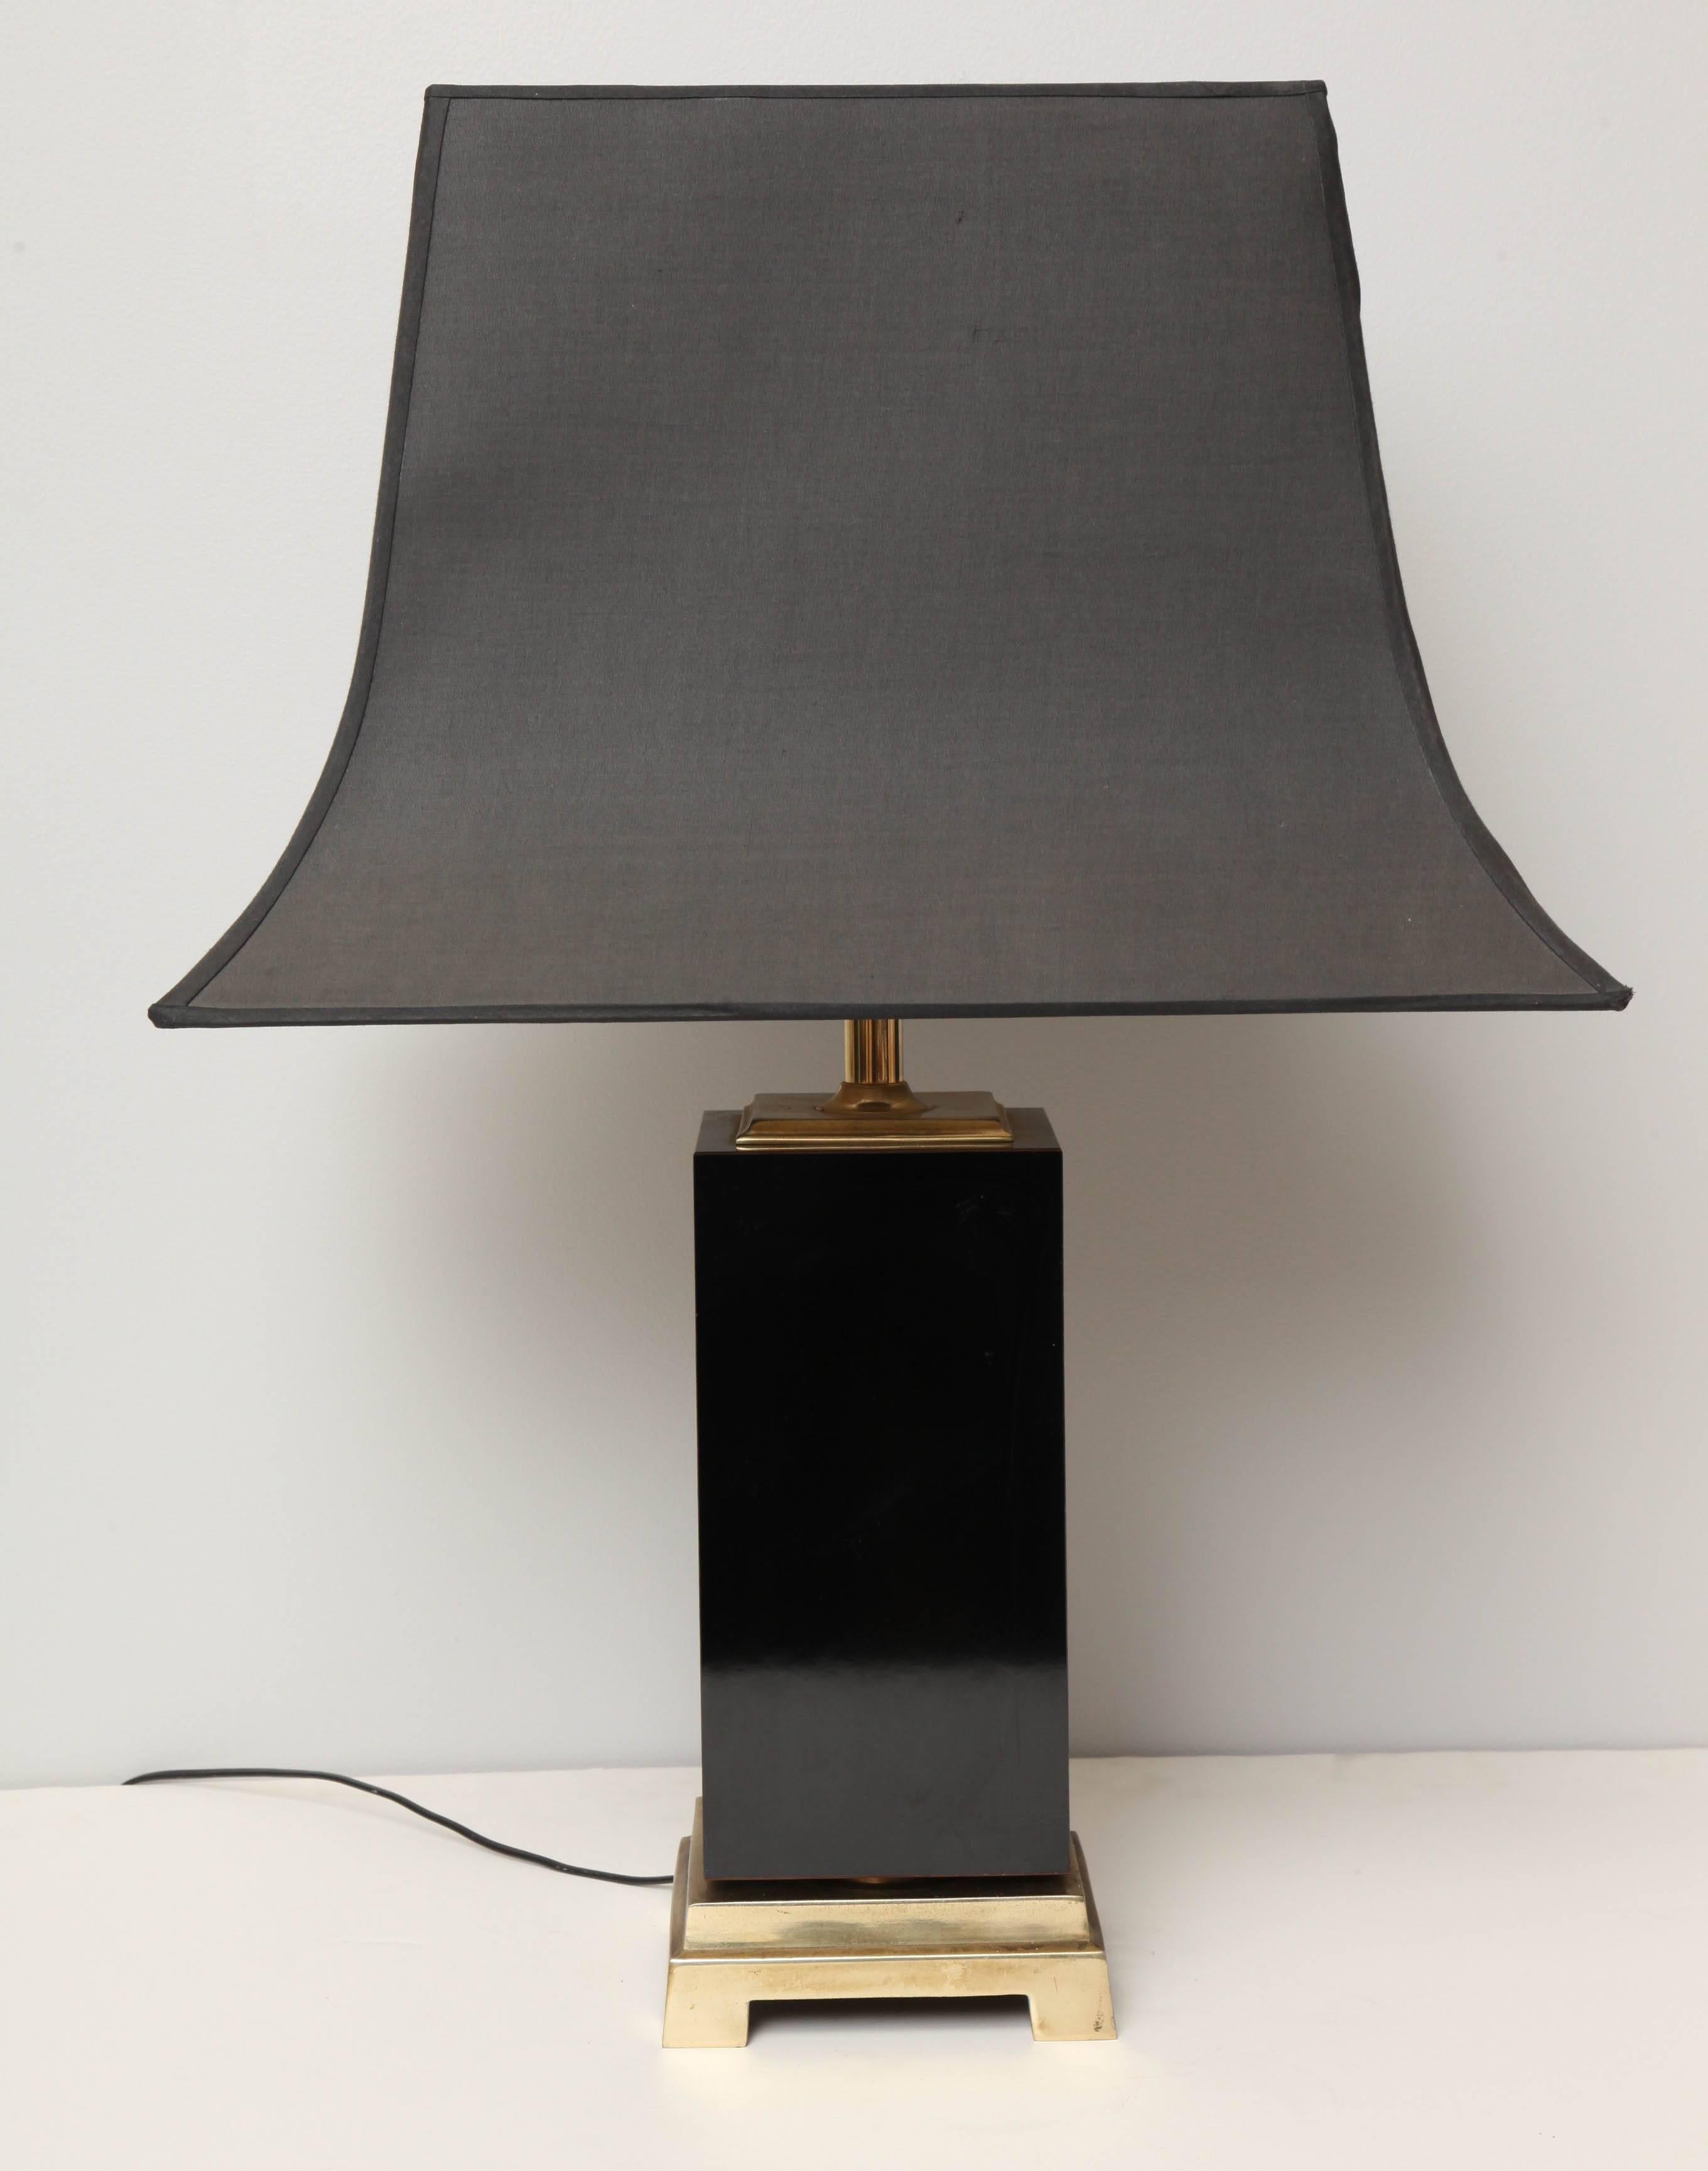 An Art Deco table lamp. Black lacquer, brass and original abat-jour.
Abat-jour measures 22" x 16". Lamp base is 7" x 7". Overall height is 31".
In the chinois style with original linen abat-jour.